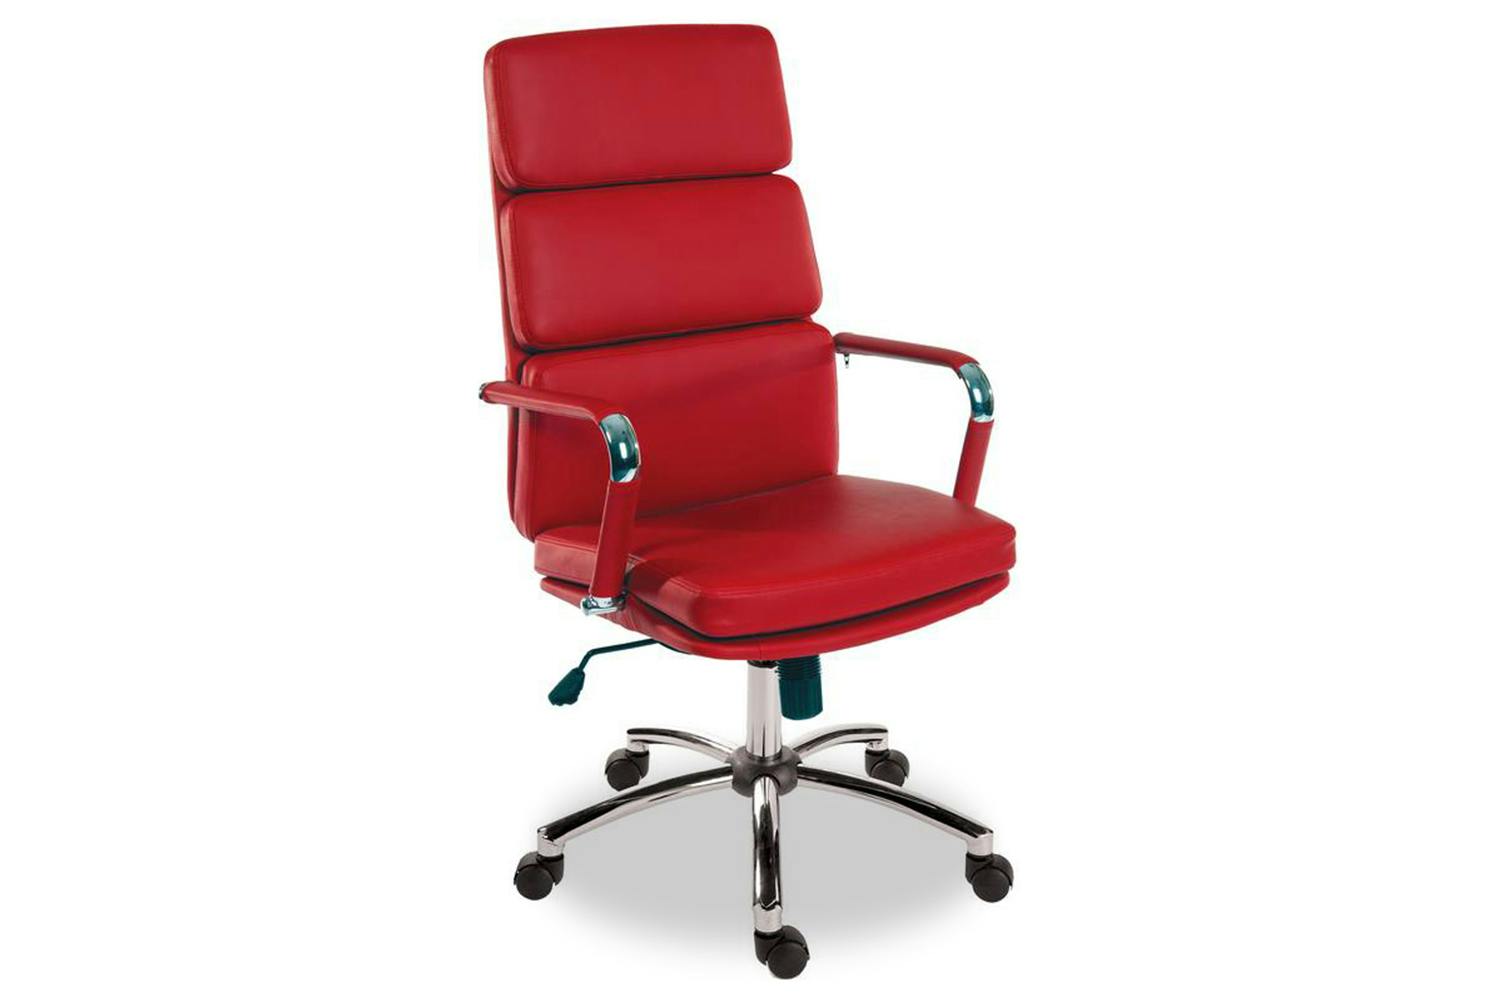 Dwight Executive Office Chair Red Main ?fit=fill&bg=0FFF&w=1500&h=1000&auto=format,compress